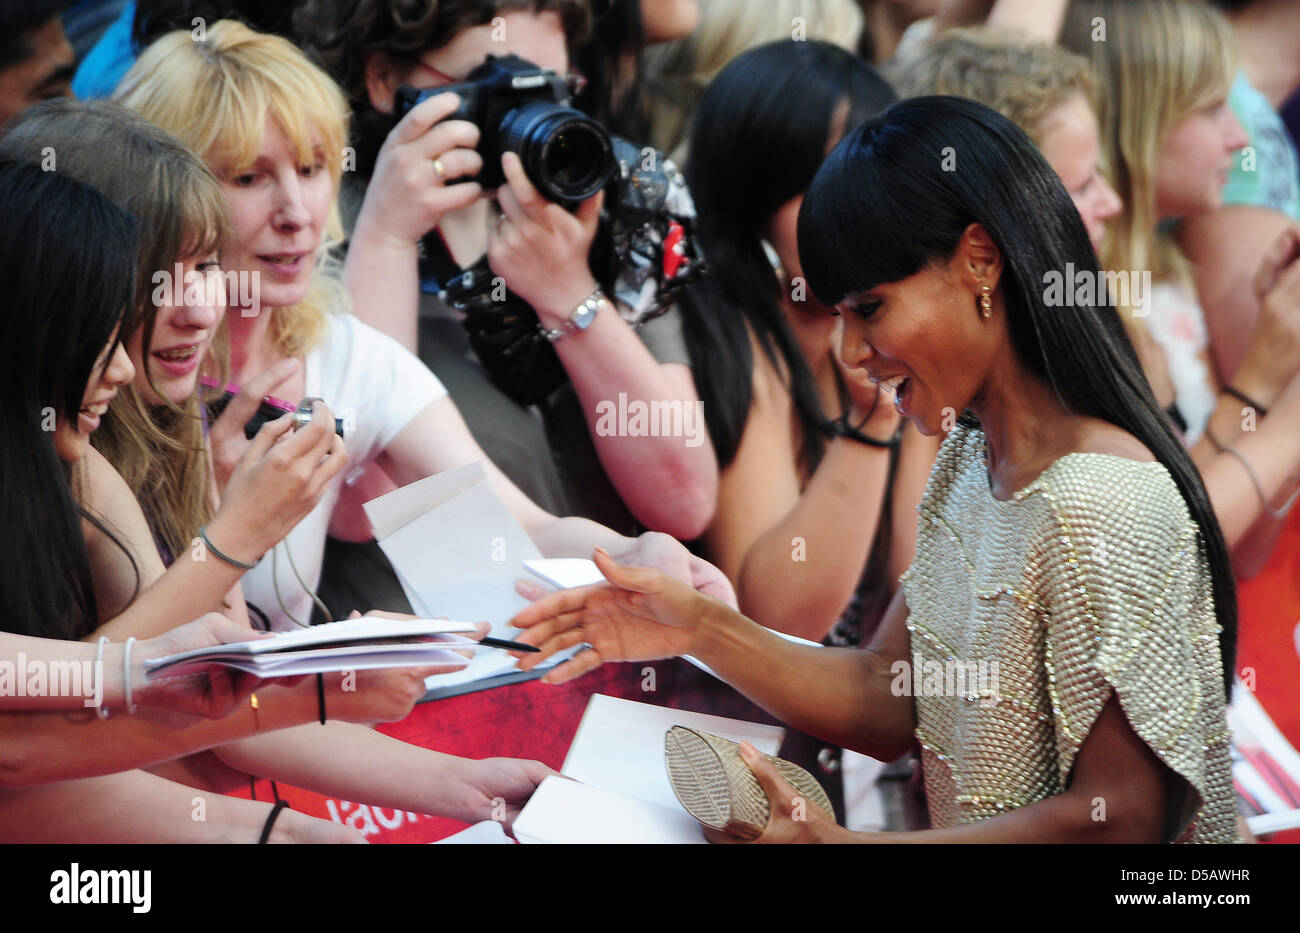 American actor Jada Pinkett Smith (R) signs autographs aon the red carpet at the premier of 'Karate Kid' in Berlin, Germany, 19 July 2010. The film will be shown in German cinemas starting 22 July 2010. Photo: Hannibal Hanschke Stock Photo